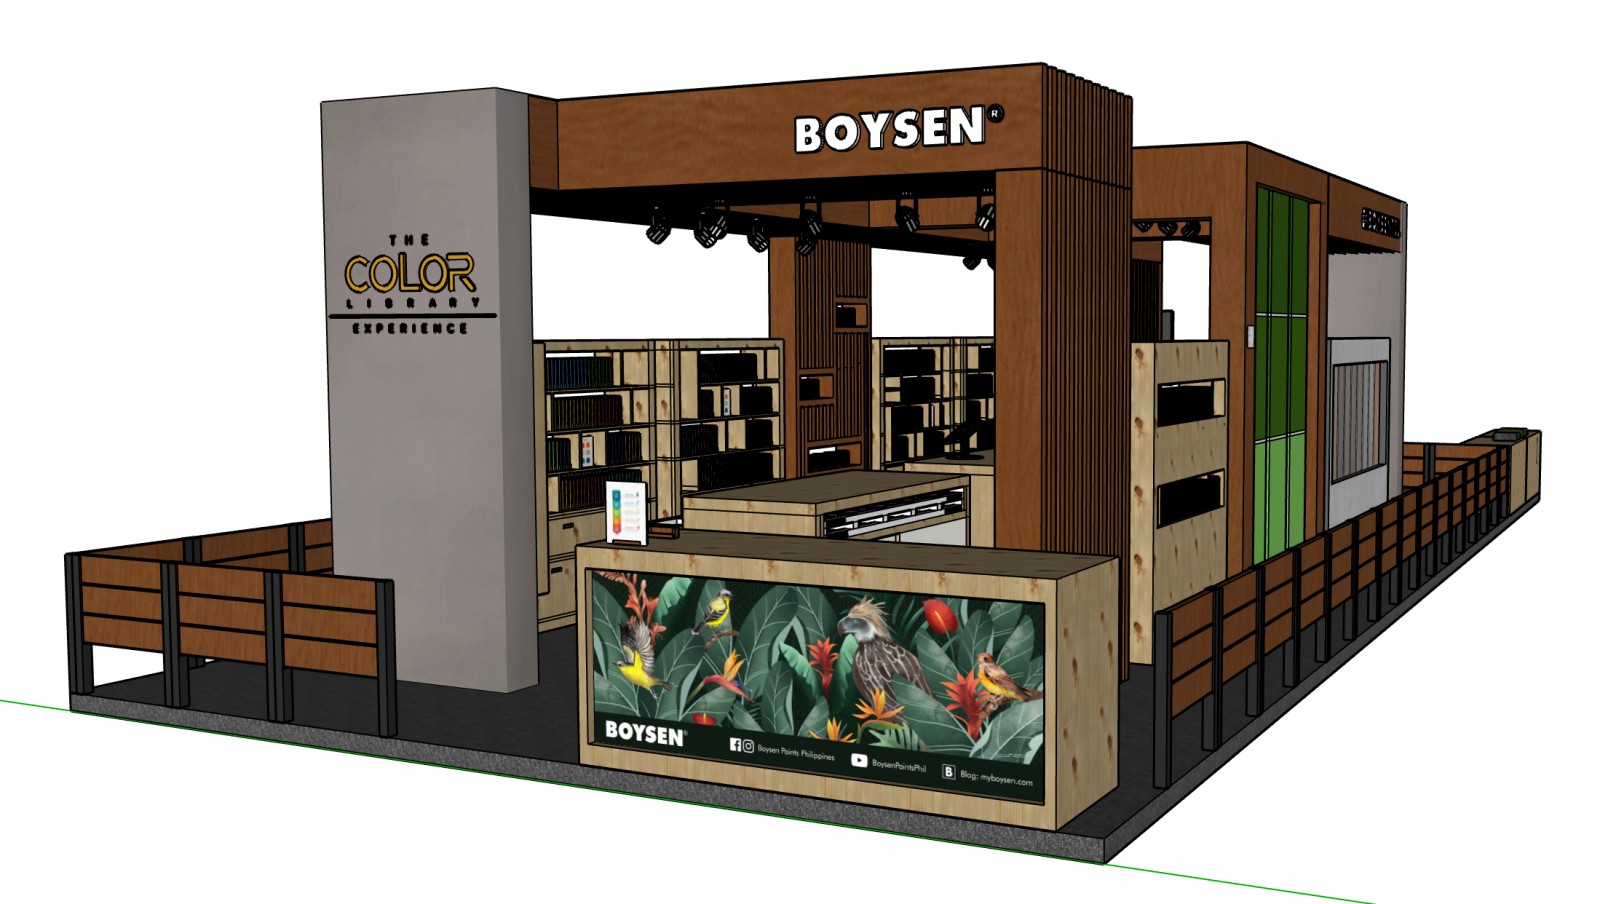 Invitation to Worldbex 2022: The Boysen Color Library Booth